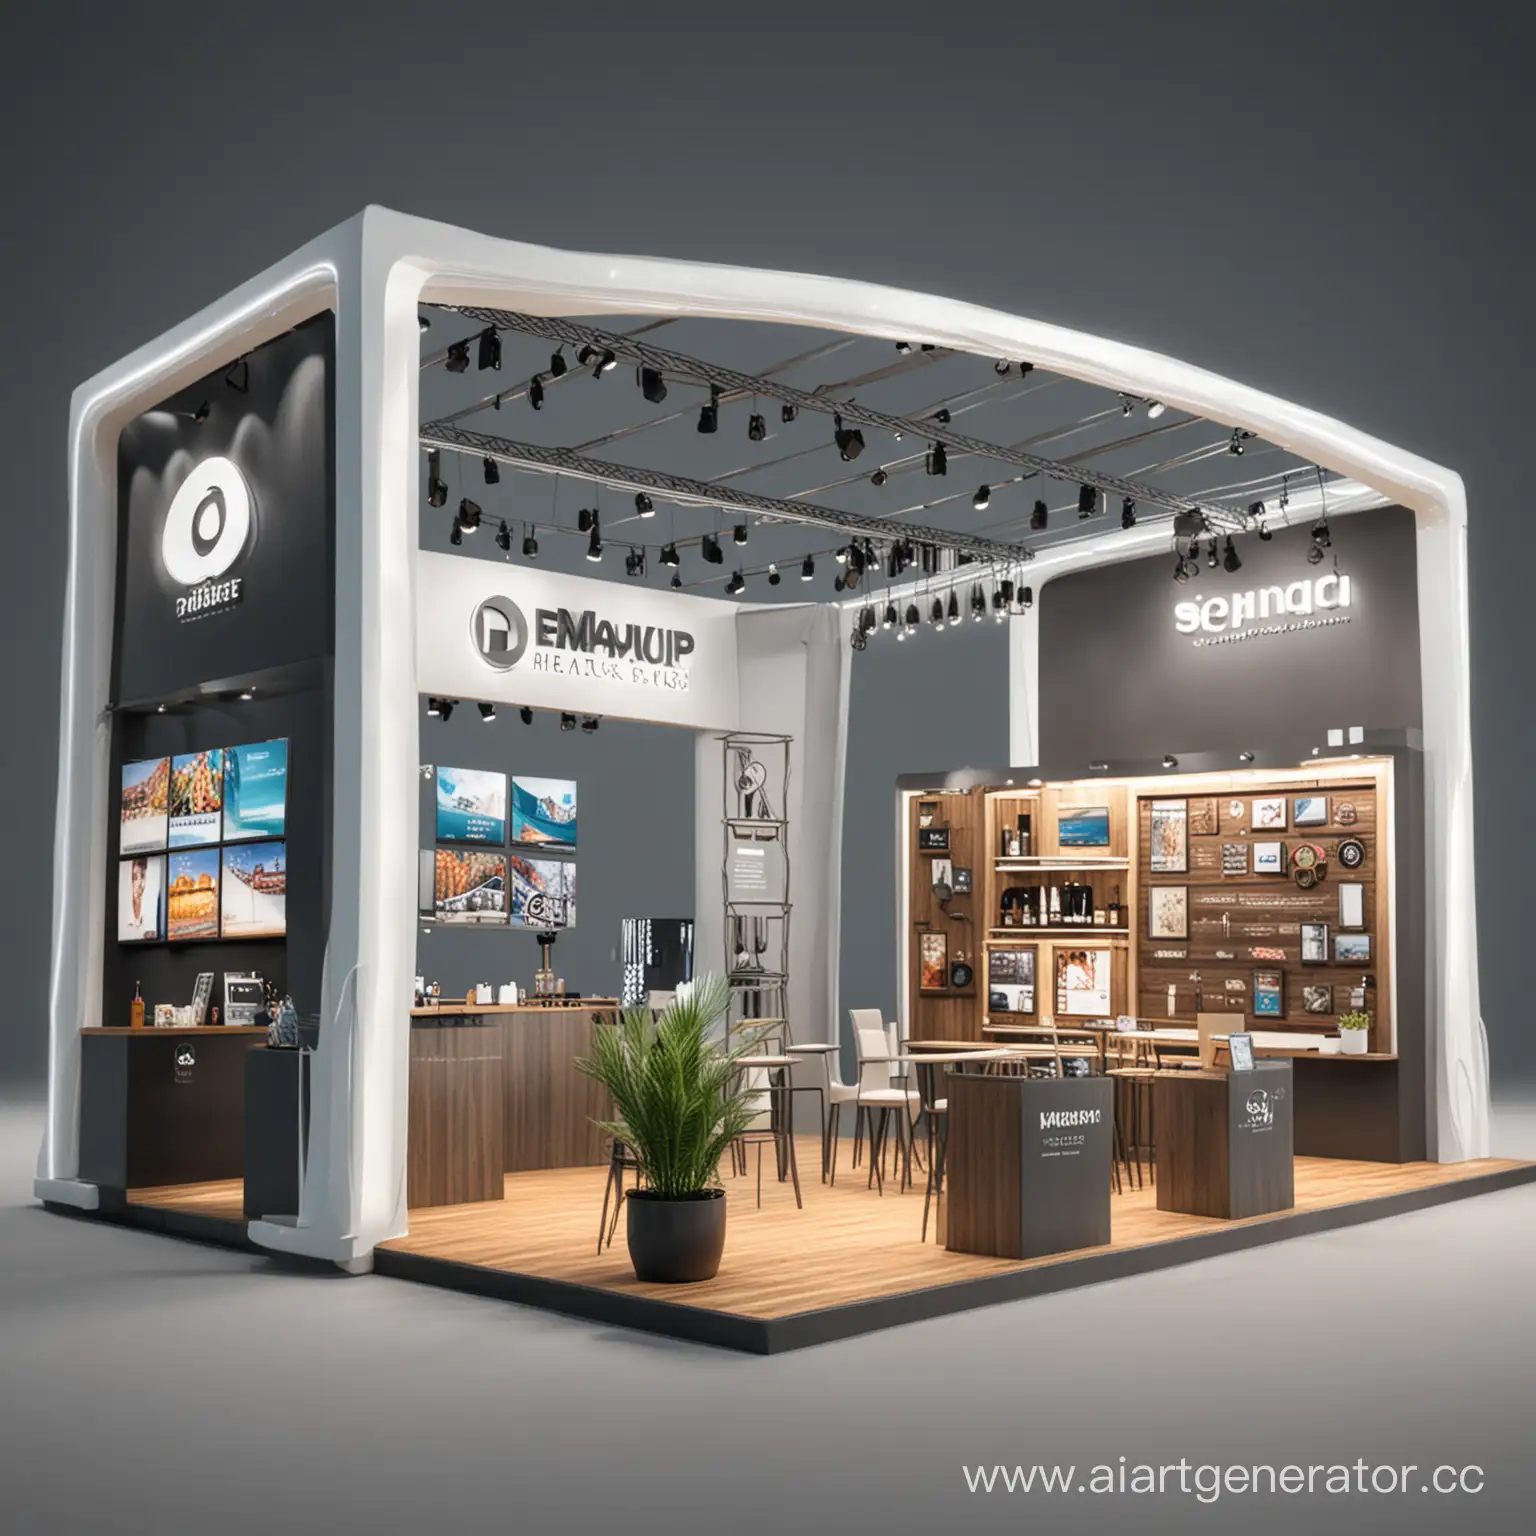 Realistic-3D-Exhibition-Stands-Showcase-by-Brand-Tour-Agency